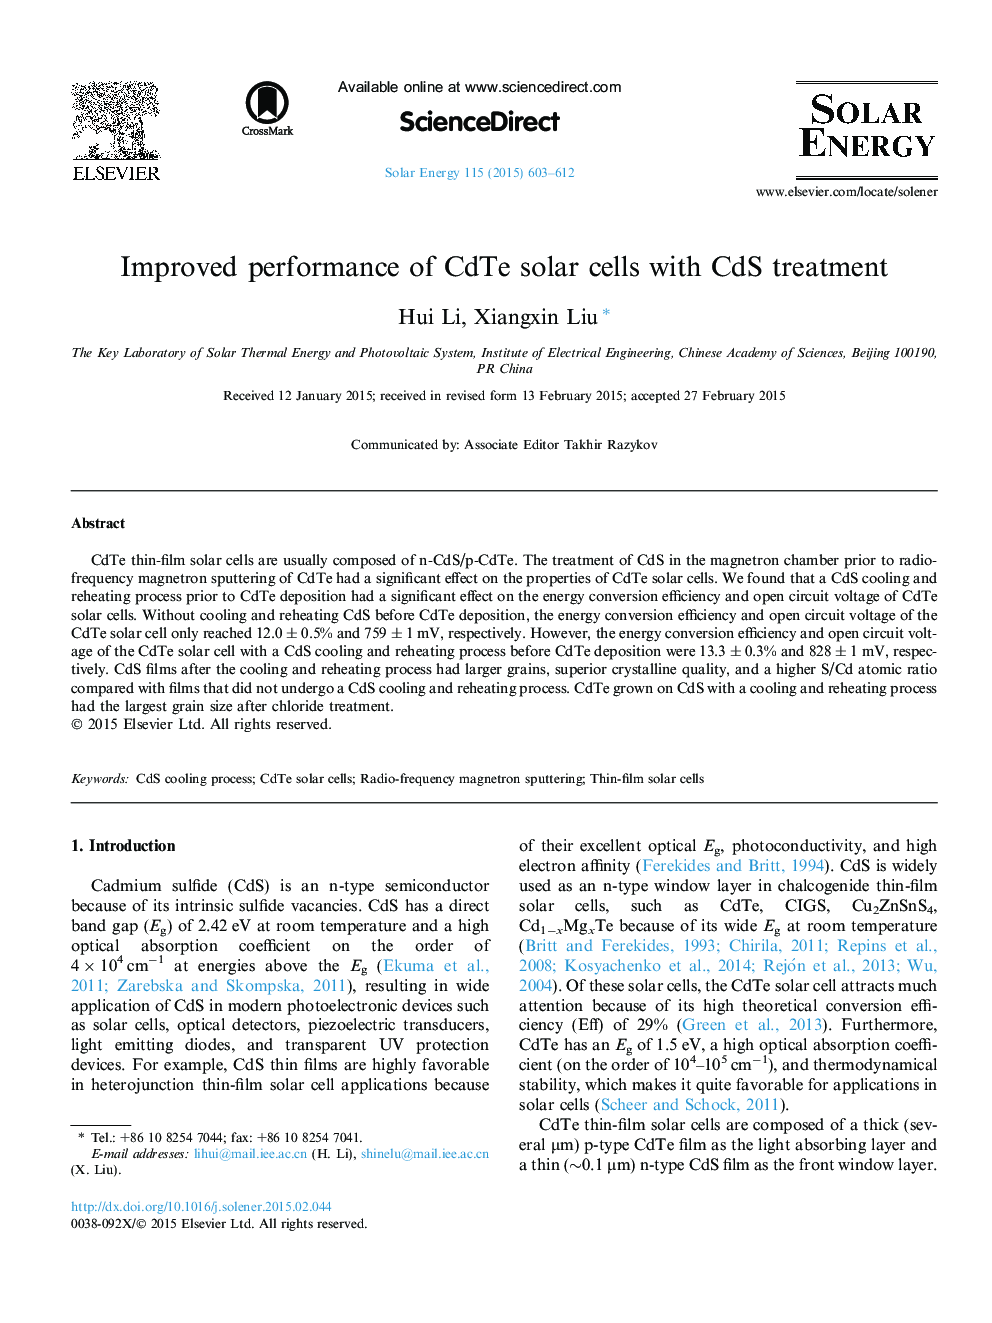 Improved performance of CdTe solar cells with CdS treatment